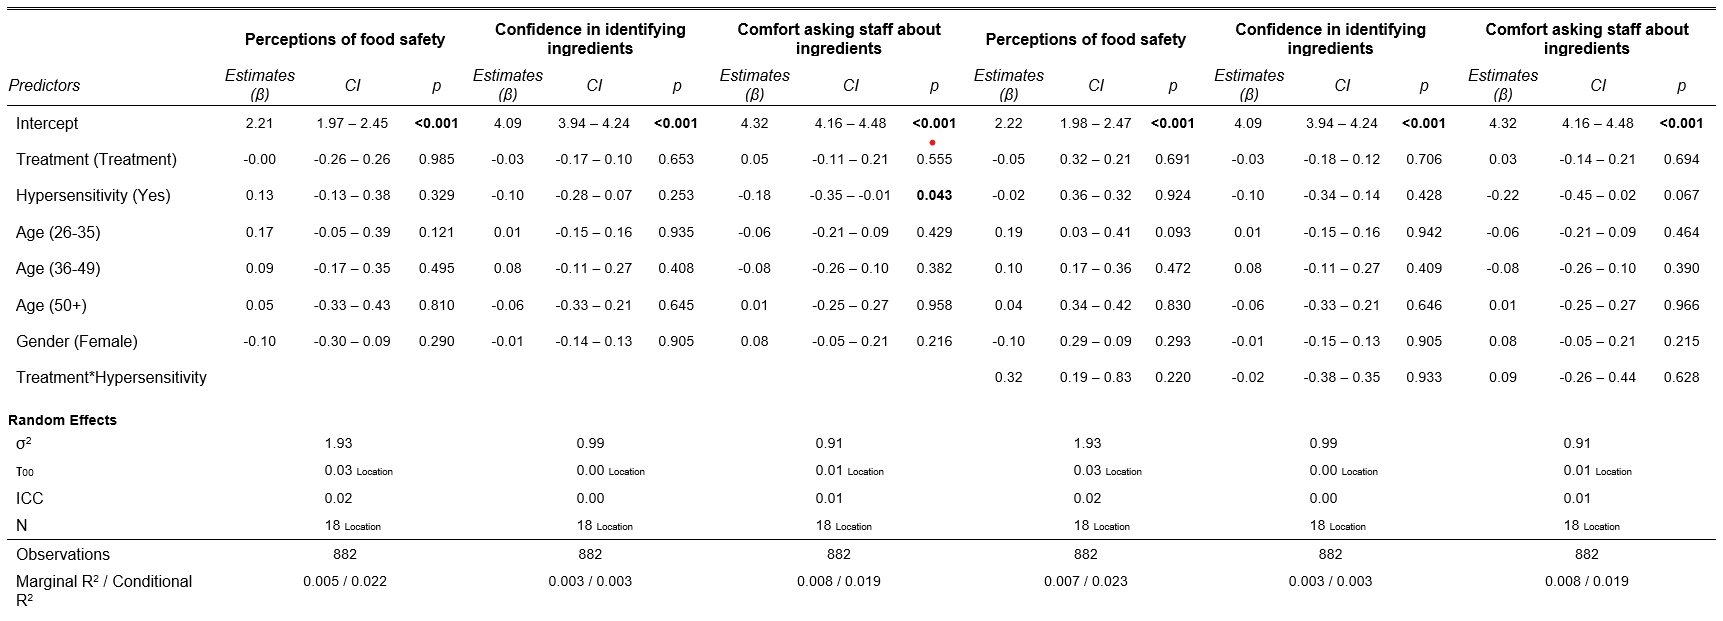 Predictors are shown in the first column. Perceptions of food safety is a common header for the second to the fourth columns. Estimates, confidence interval and p-value for perception are shown in the second, third and fourth column respectively. Confidence in identifying ingredients is a common header for the fifth to the seventh columns. Estimates, confidence interval and p-value for confidence are shown in the fifth, sixth and seventh column respectively. Comfort asking staff about ingredients is a commo